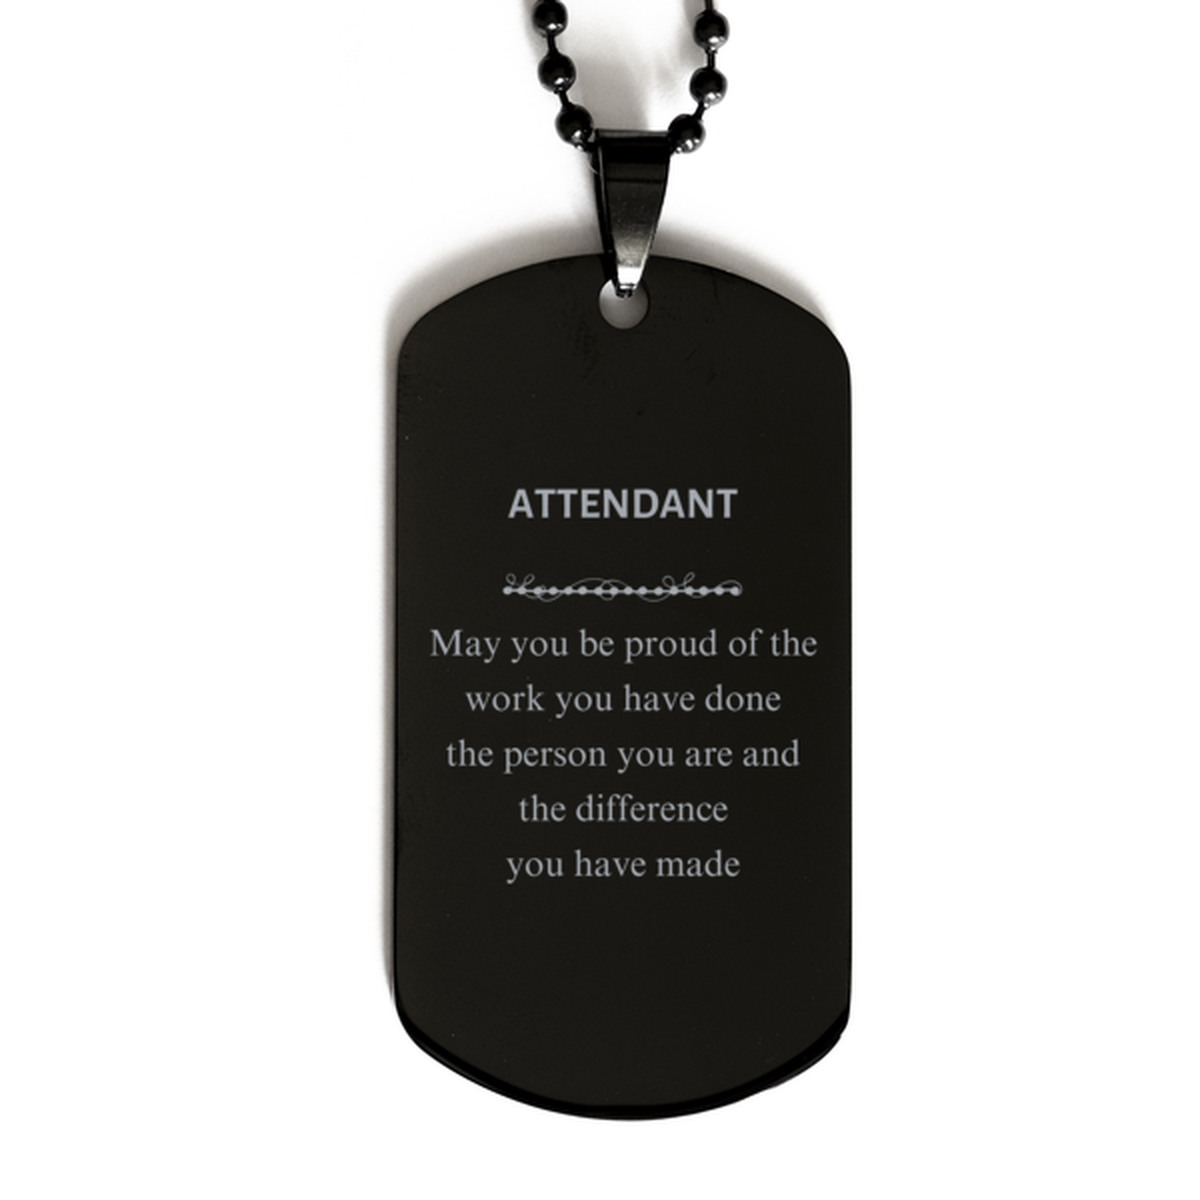 Attendant May you be proud of the work you have done, Retirement Attendant Black Dog Tag for Colleague Appreciation Gifts Amazing for Attendant